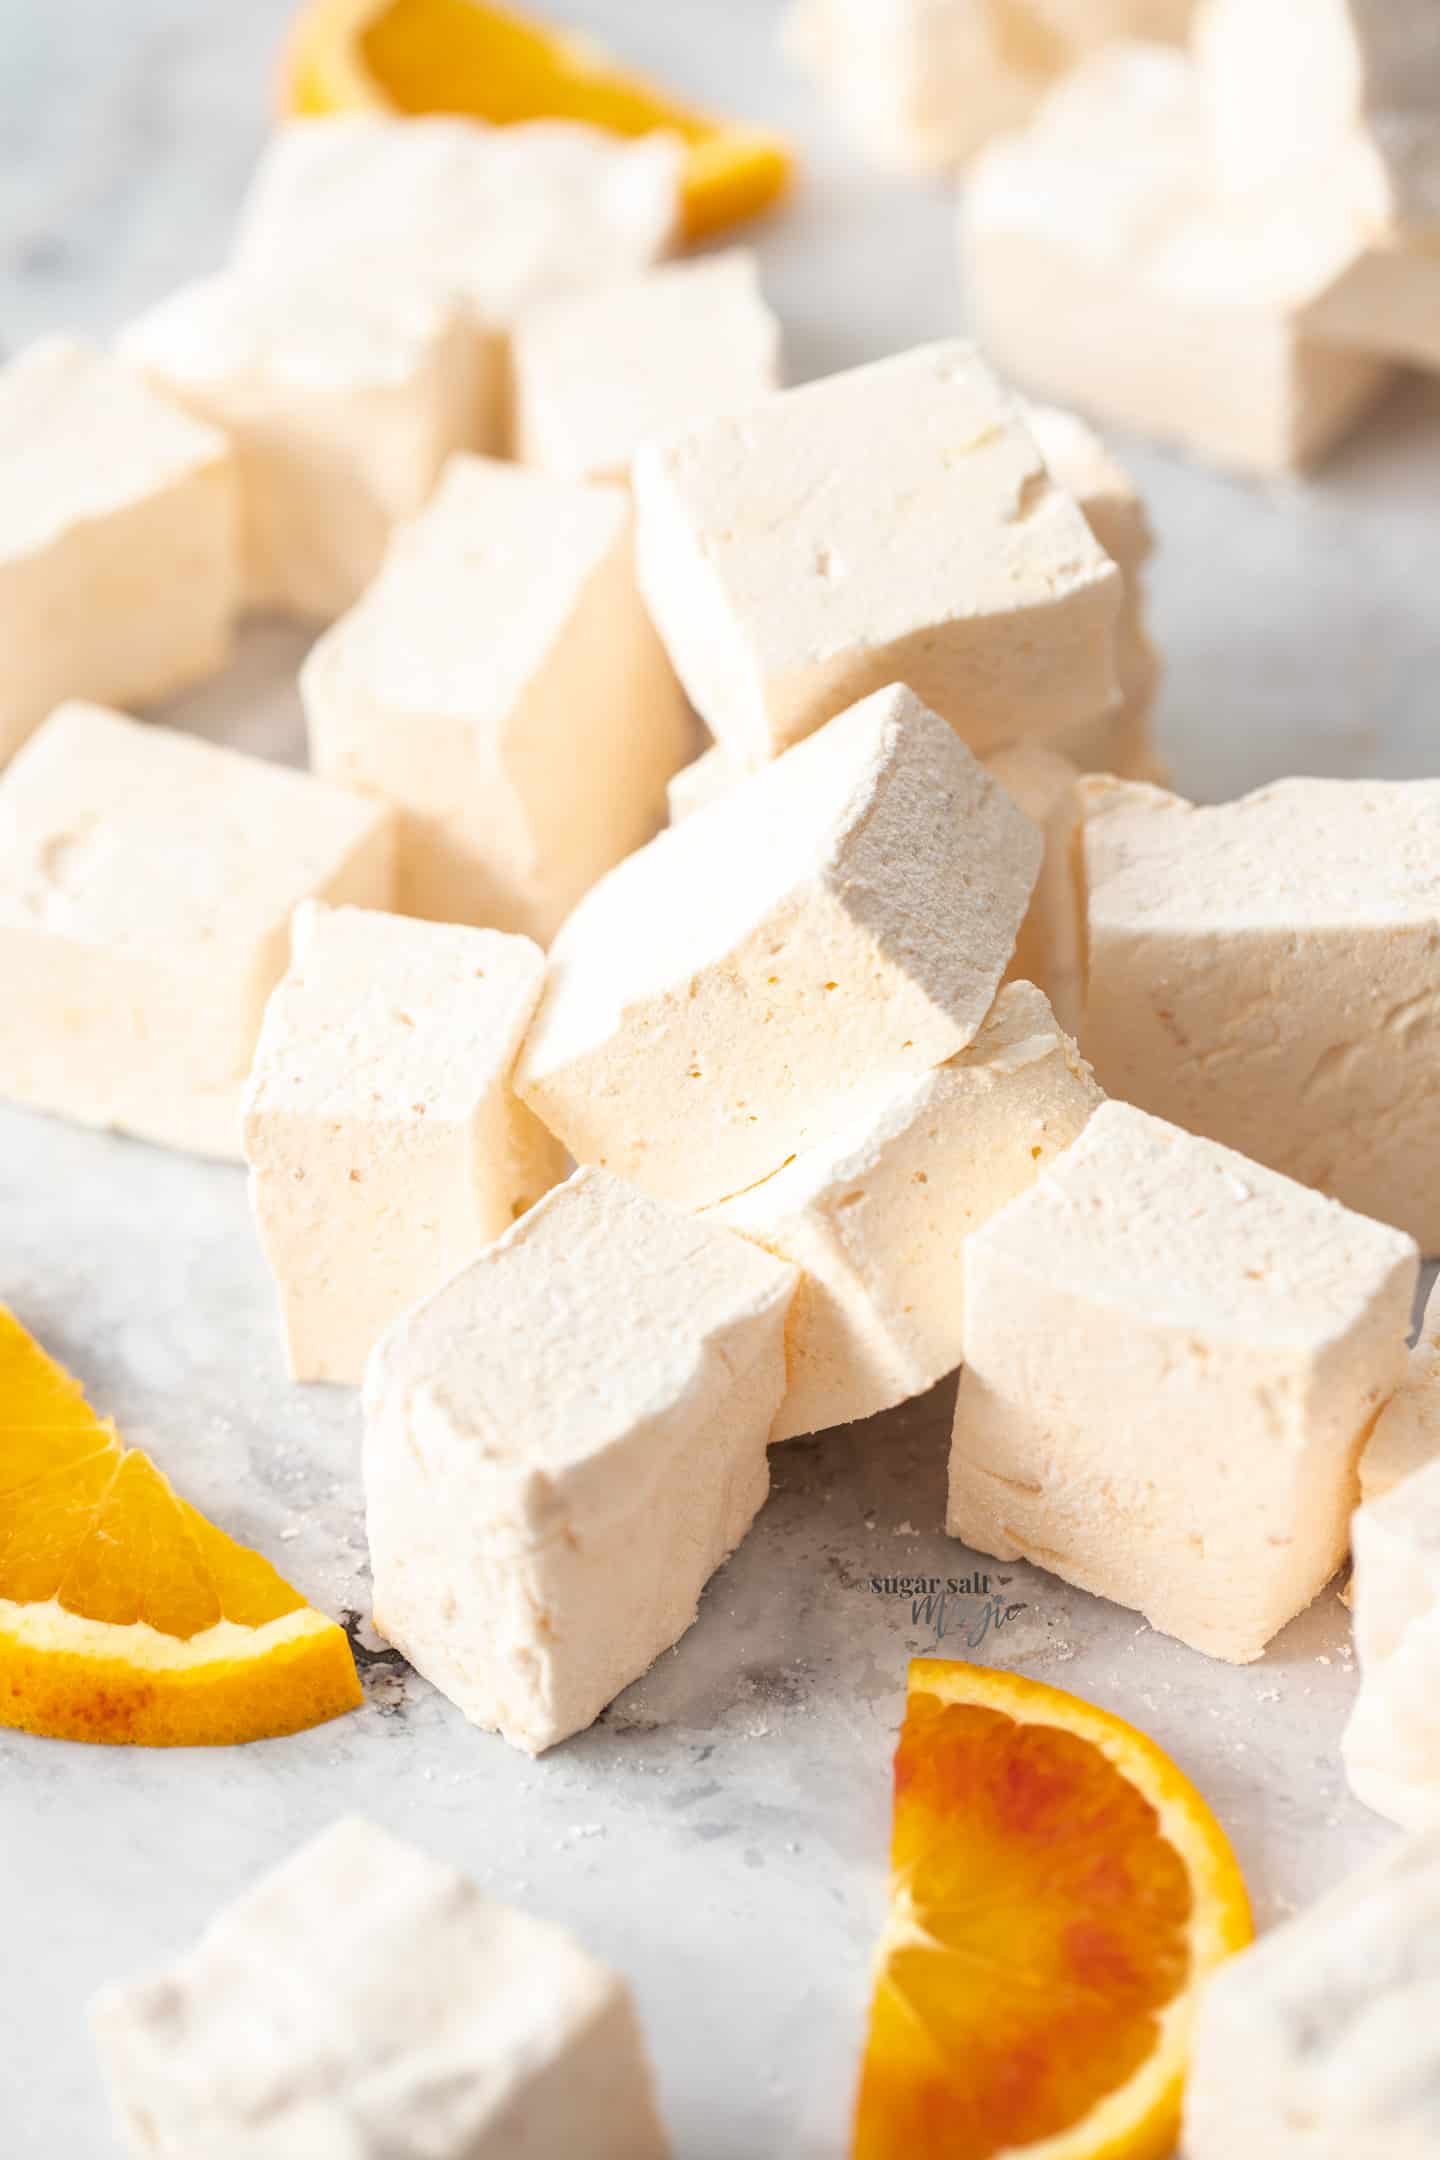 A pile of orange marshmallows on a grey marble surface.